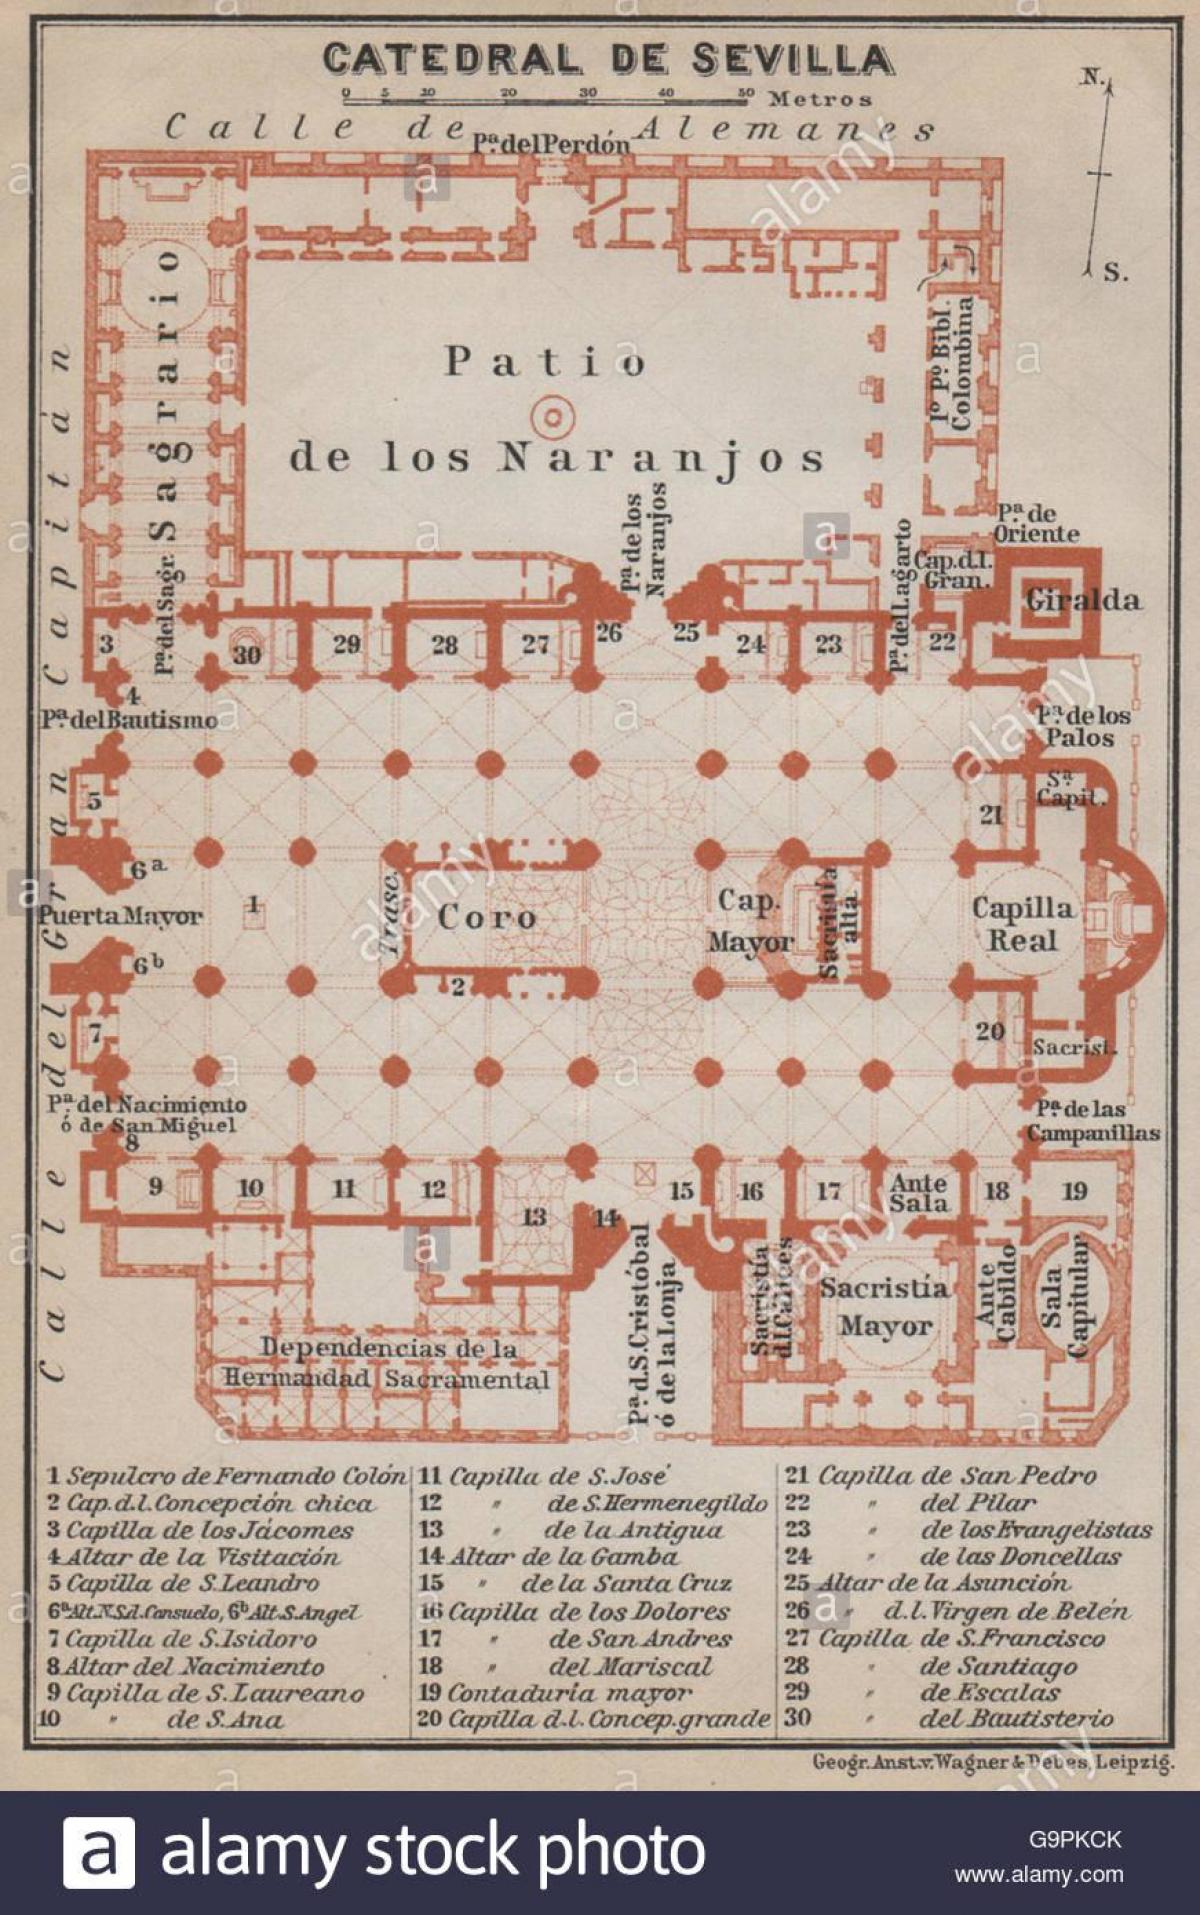 map of Seville cathedral